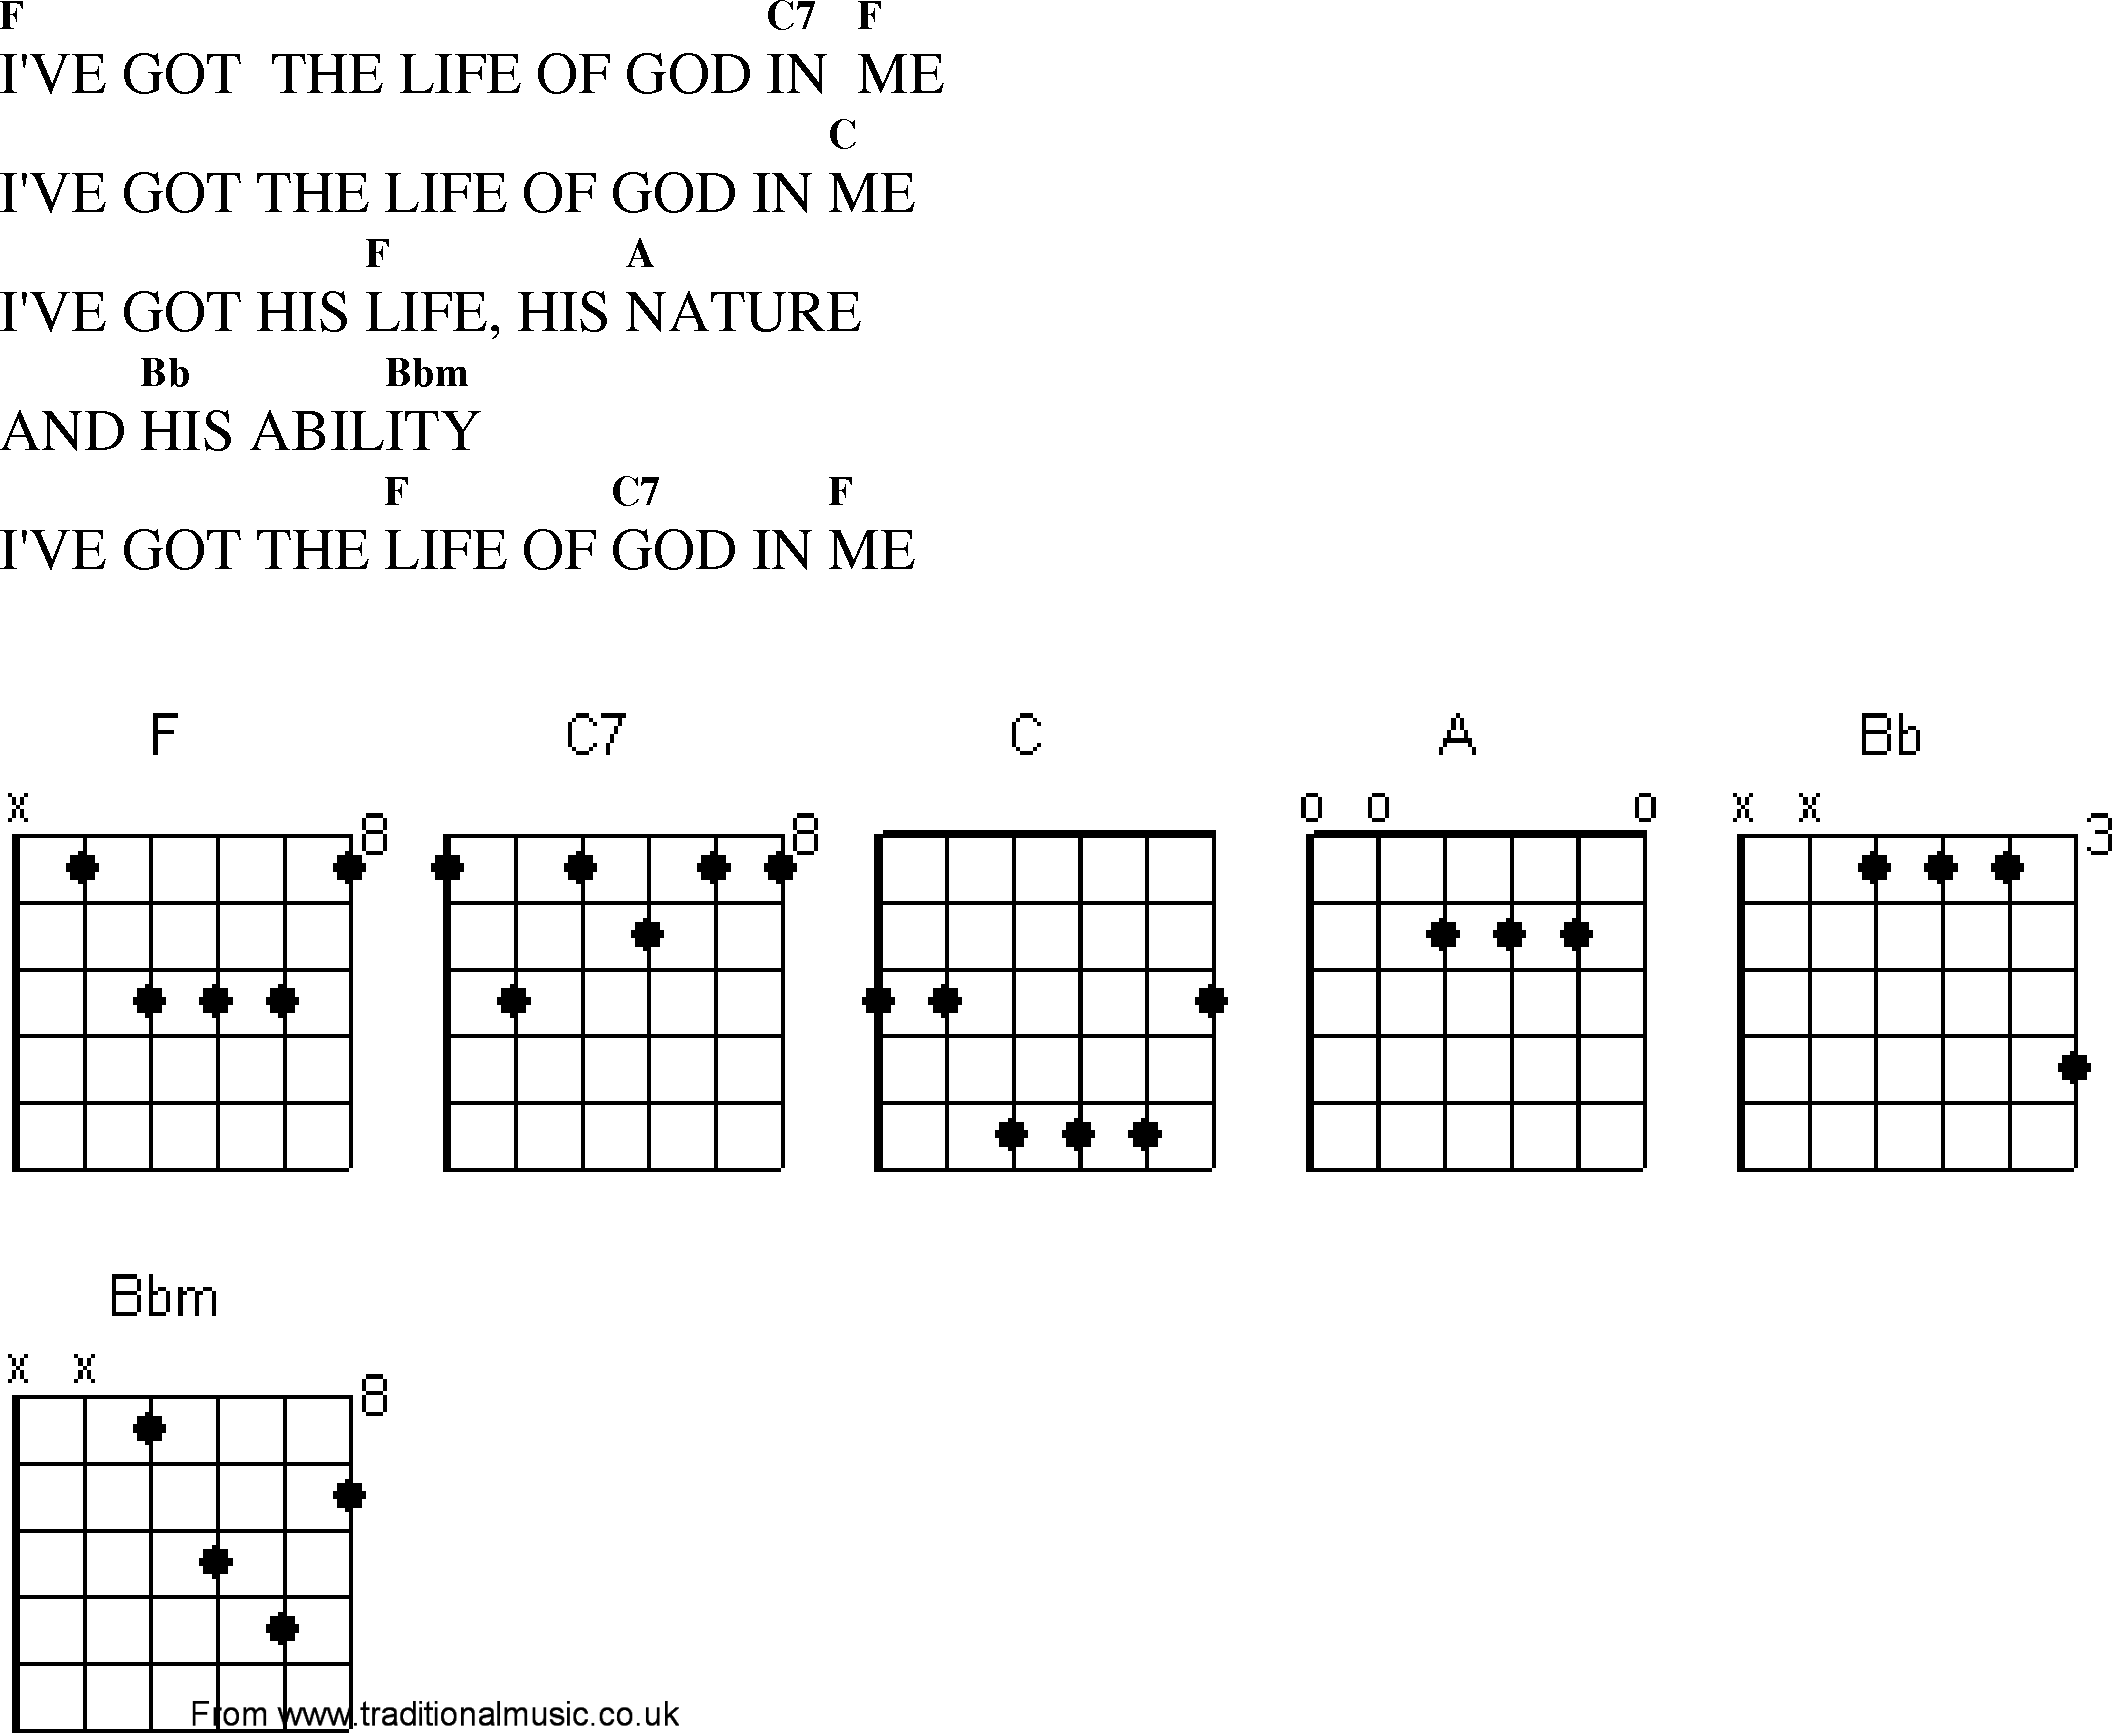 Gospel Song: ive_got_the_life_of_go_in_me, lyrics and chords.